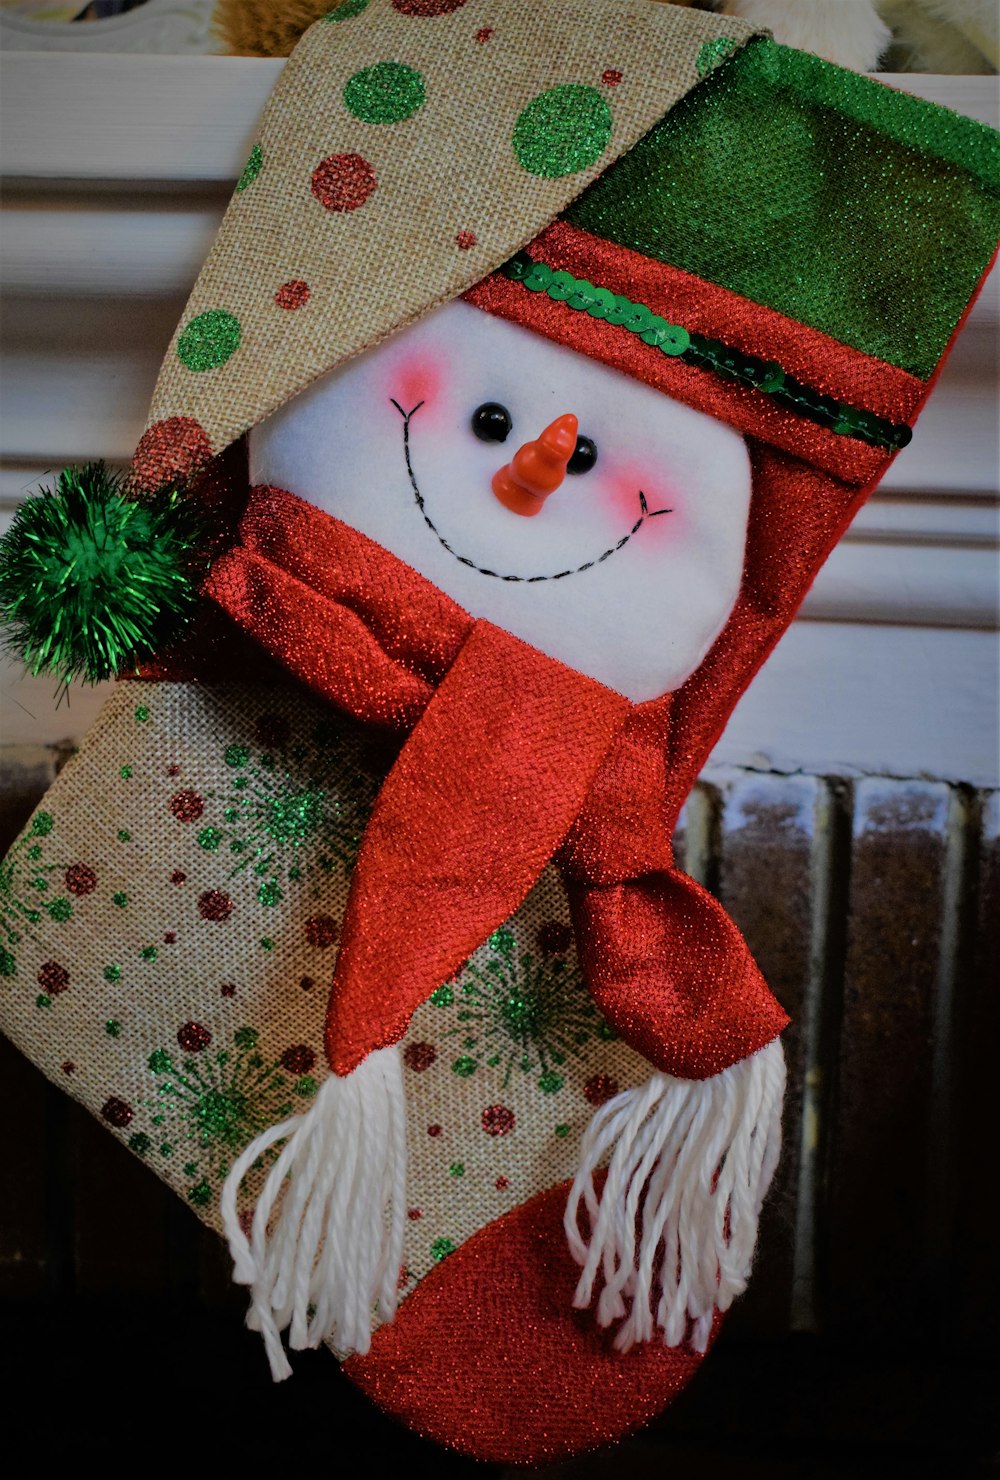 a christmas stocking with a snowman wearing a hat and scarf